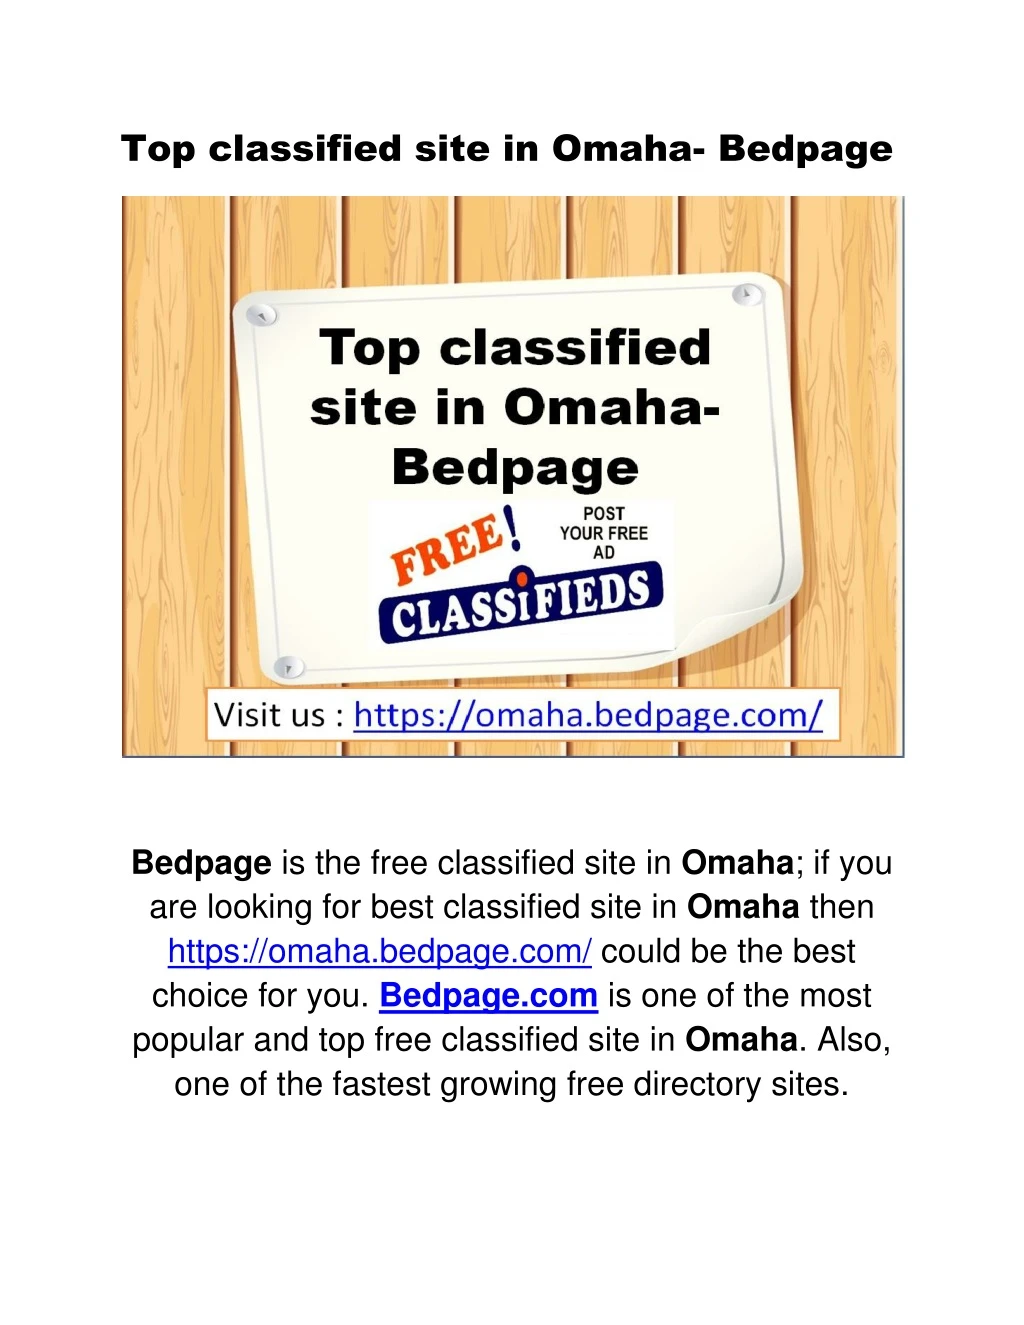 top classified site in omaha bedpage